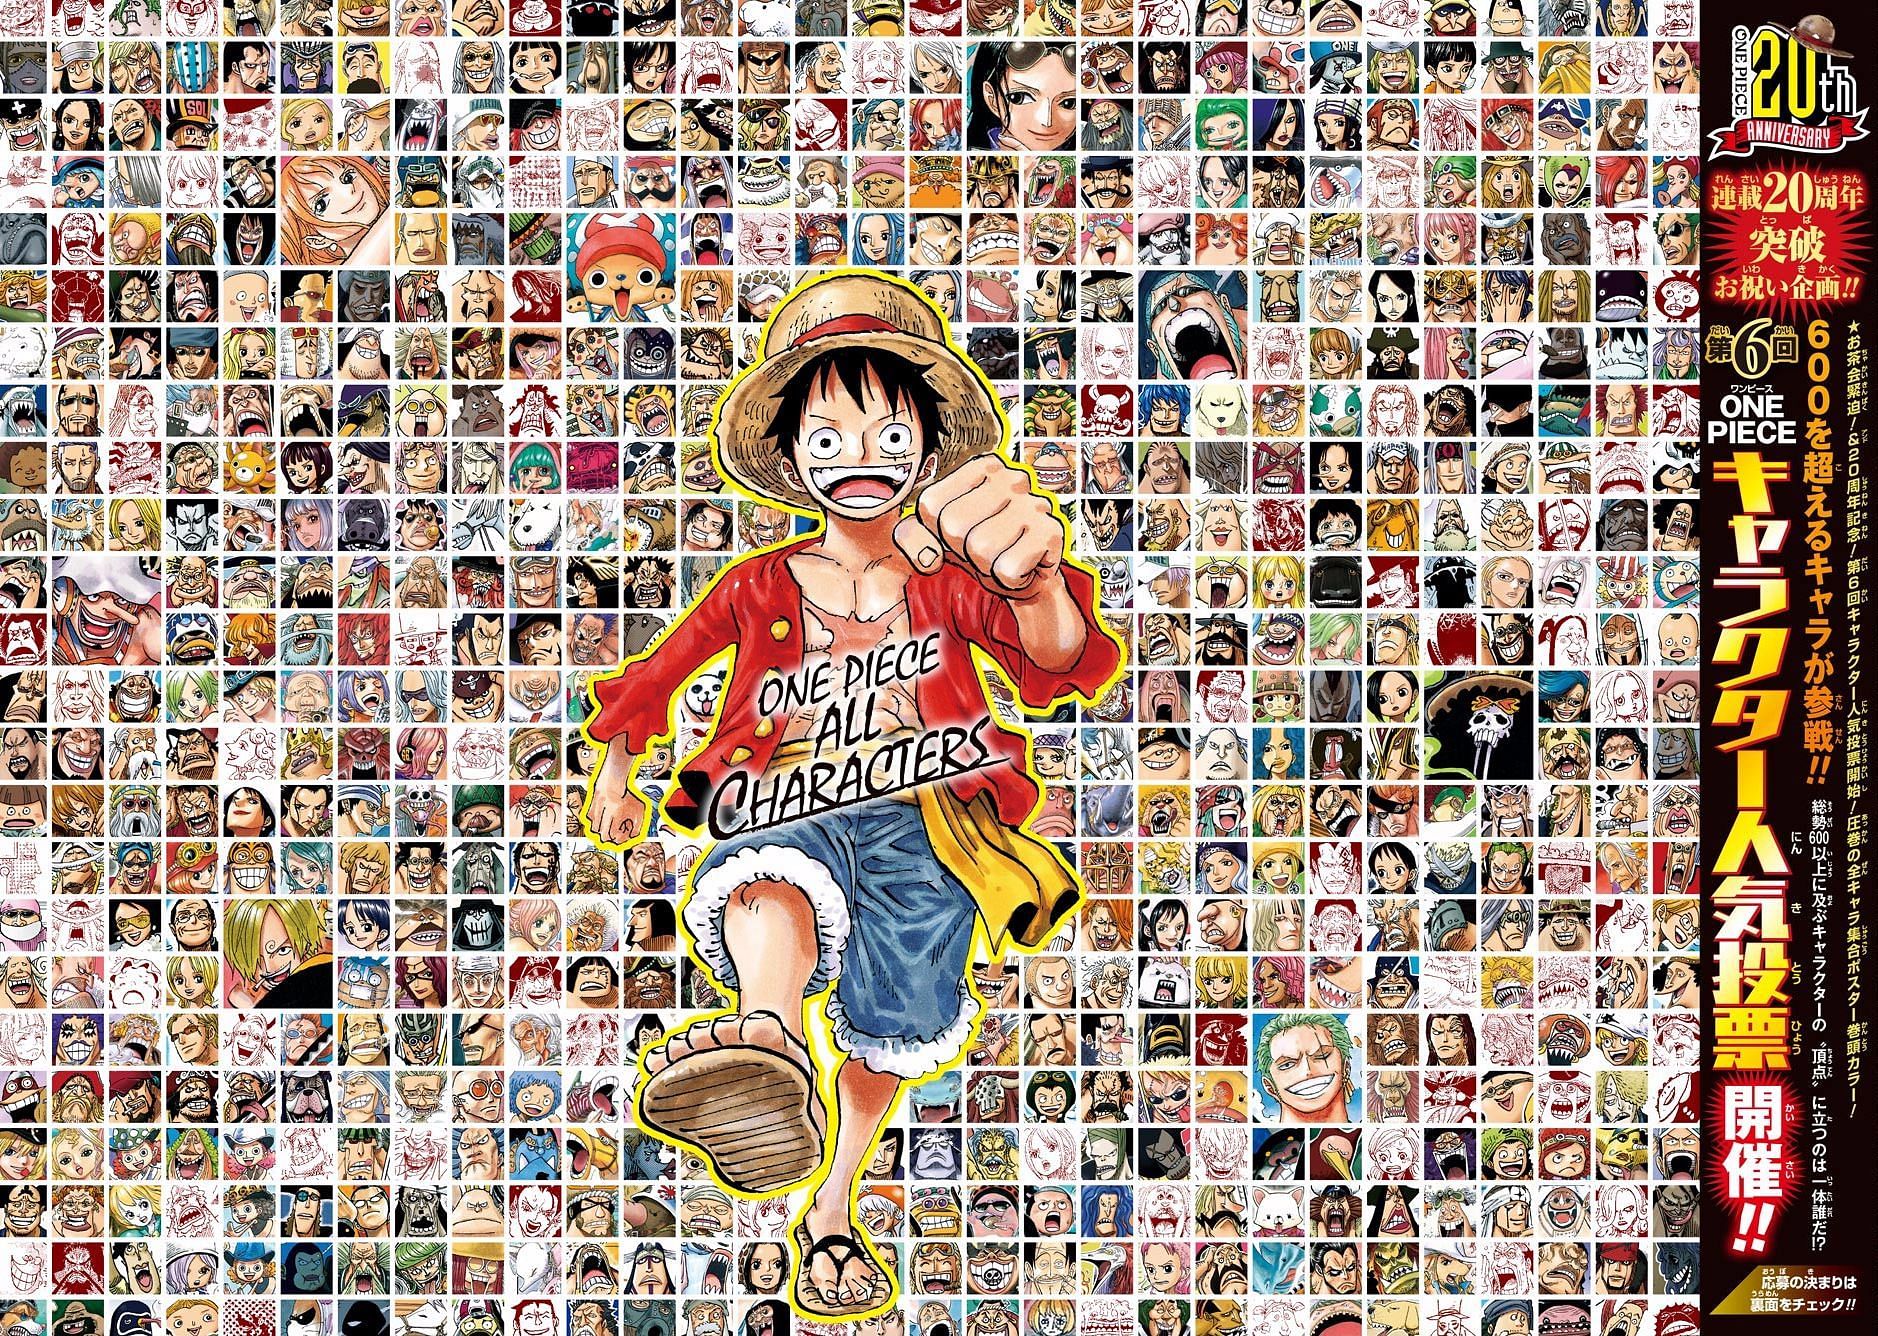 A compilation image featuring all canon One Piece characters. (Image via Toei Animation)